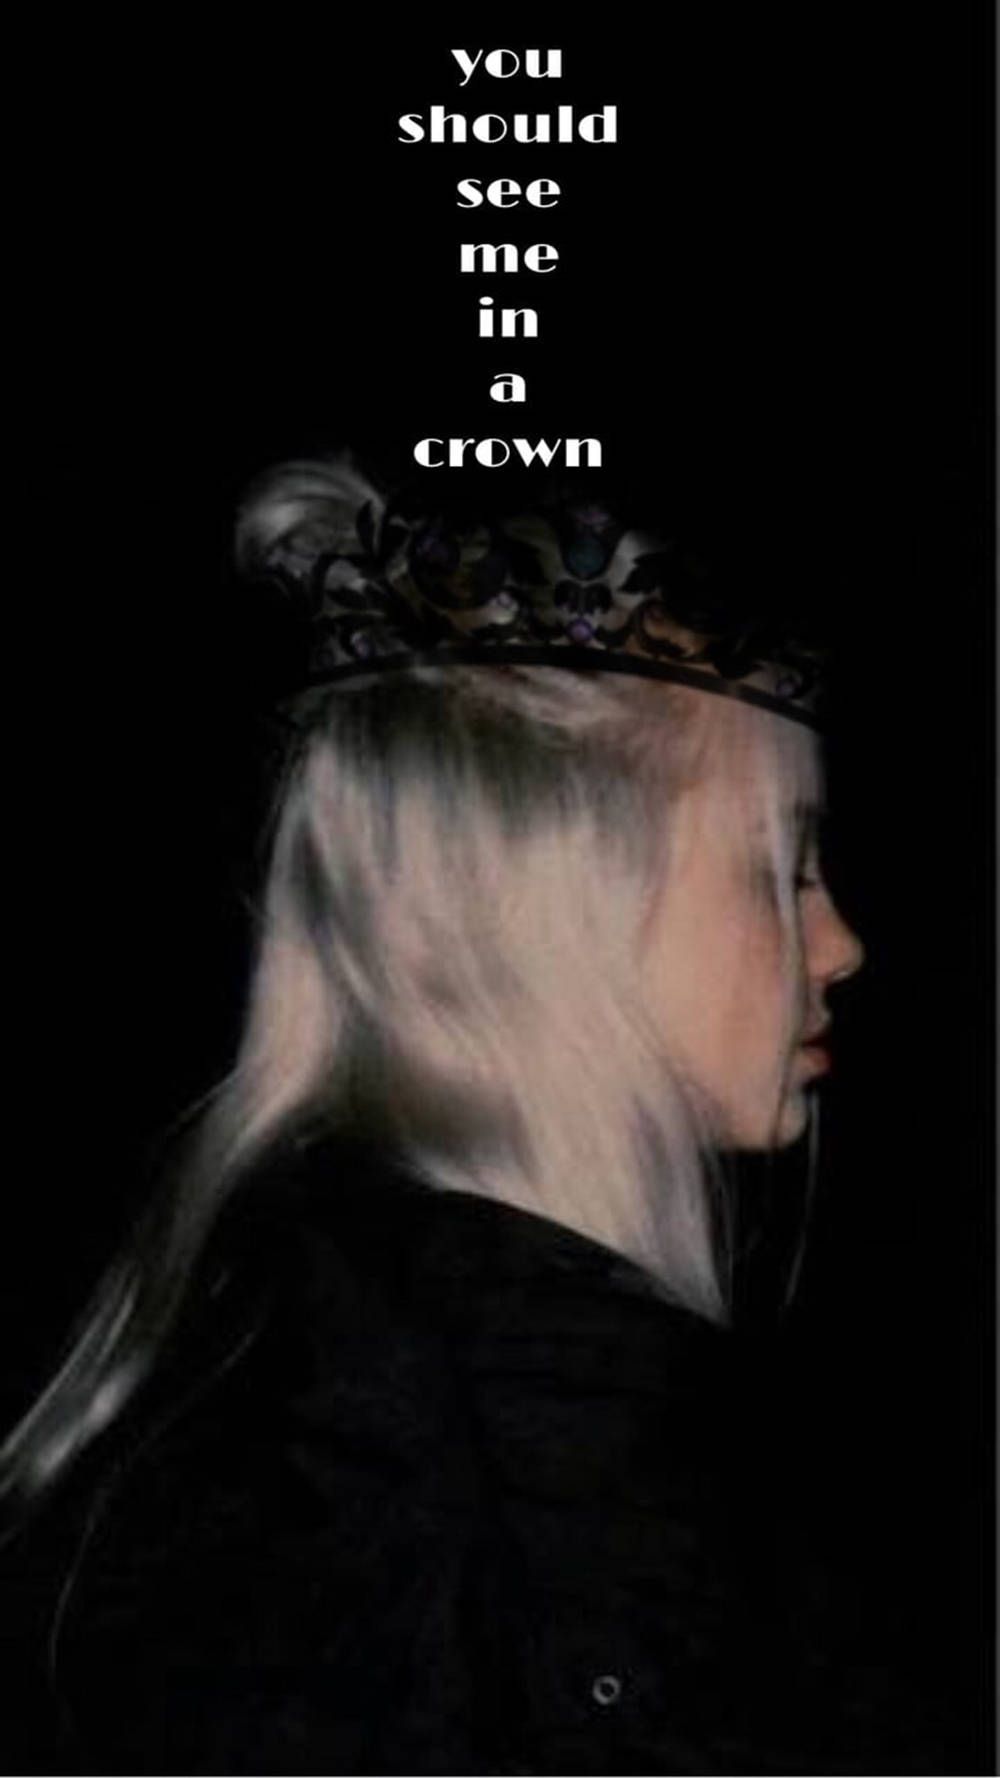 Download Aesthetic Billie Eilish You Should See Me In A Crown Wallpaper